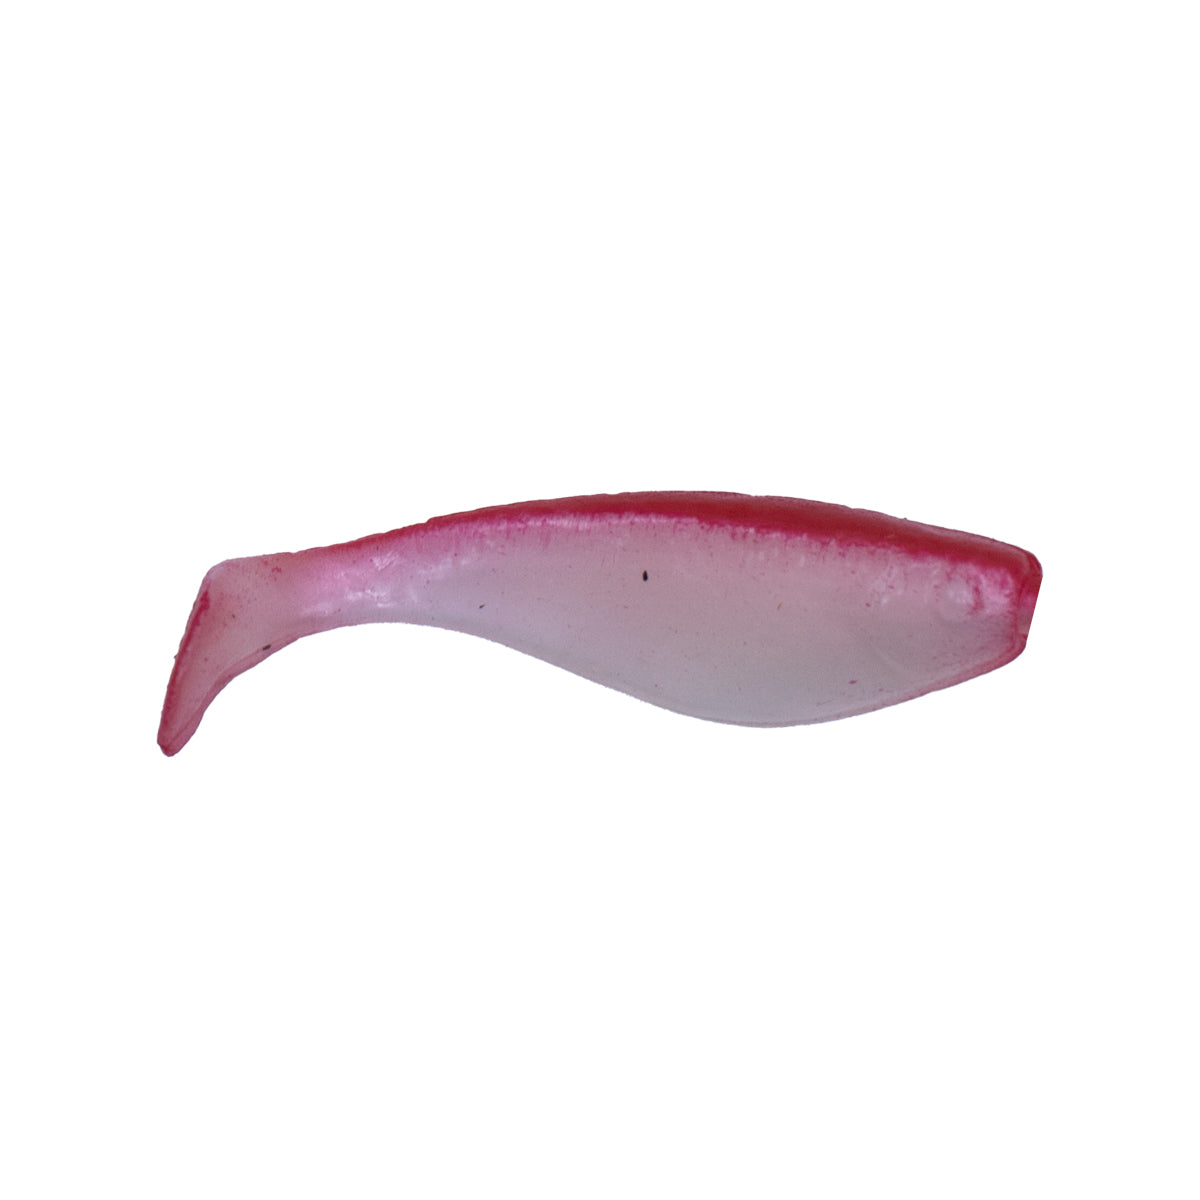 Huntin' Shad, Pack of 10